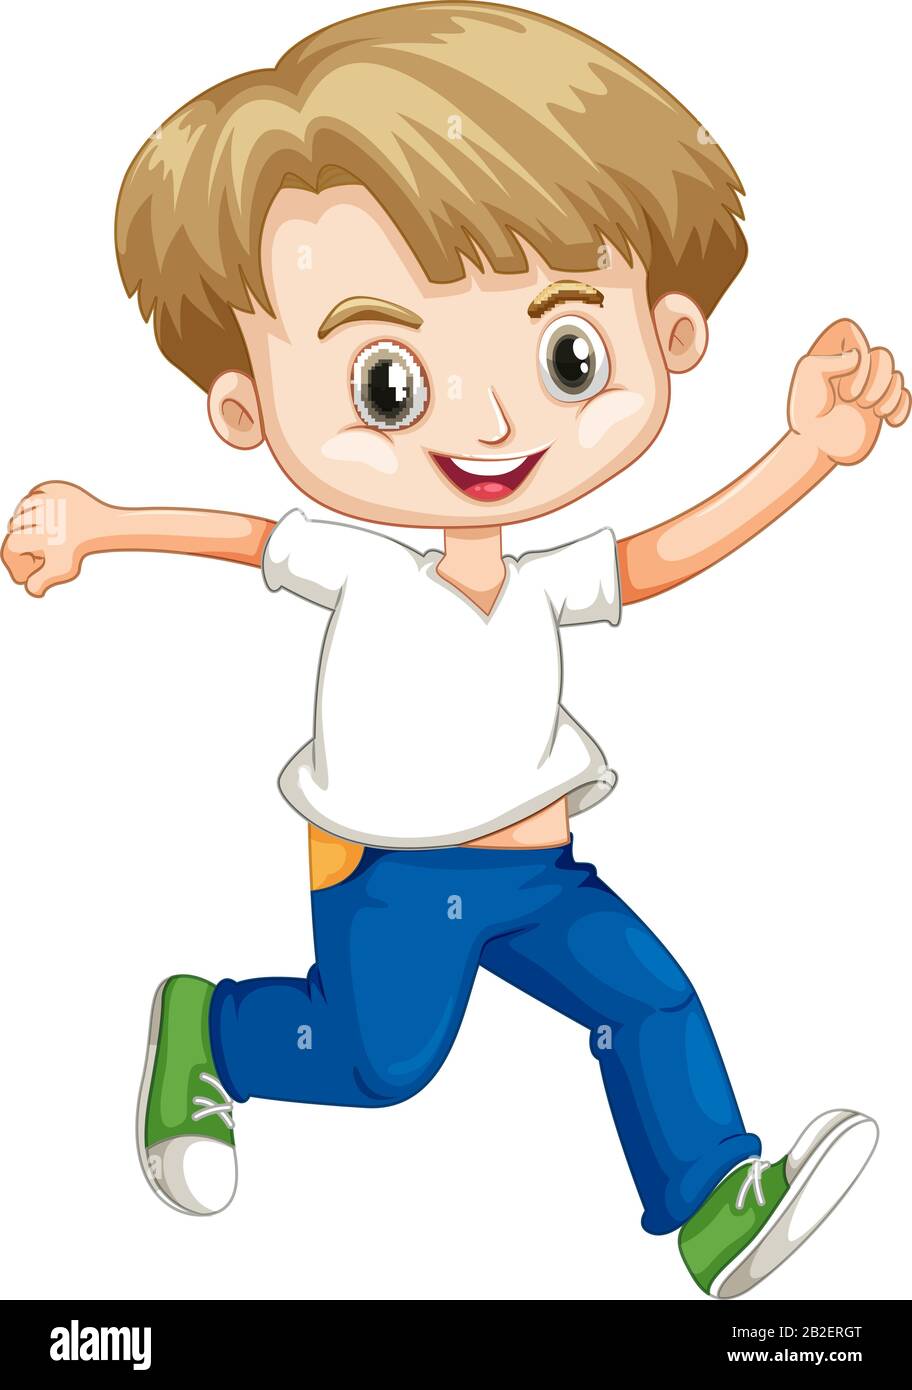 Cute boy in white shirt and blue jeans illustration Stock Vector Image ...